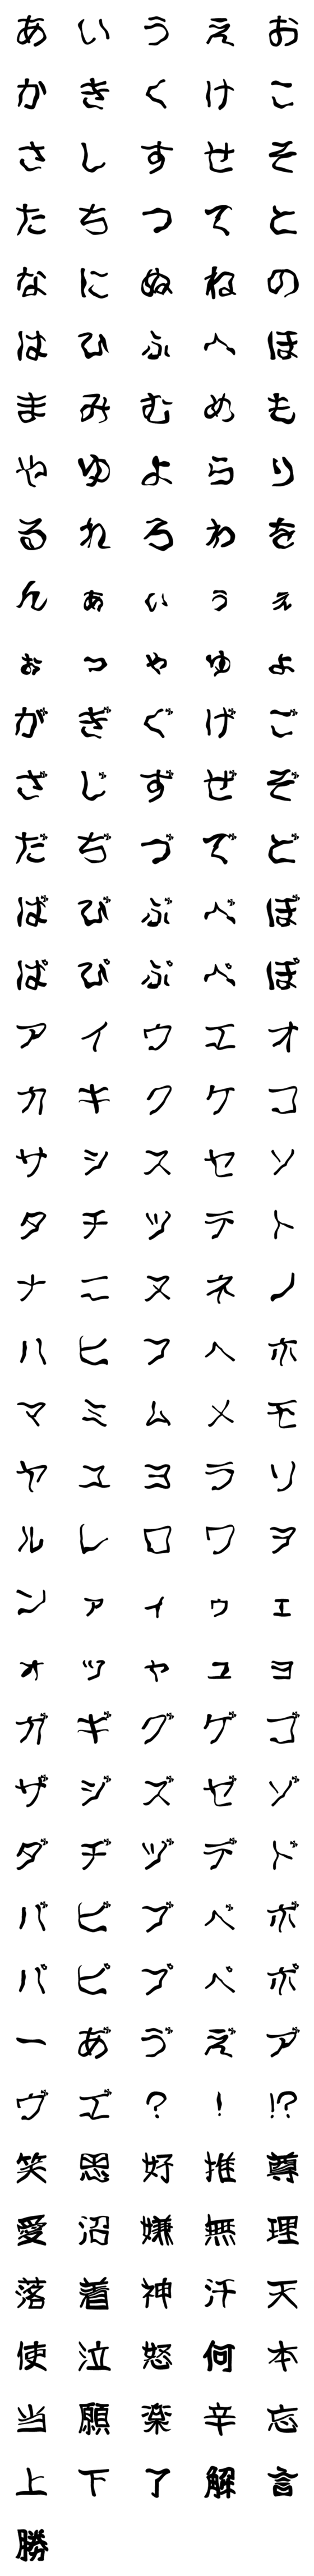 [LINE絵文字]落ち着け‼(妙に動くデコ文字+漢字)の画像一覧